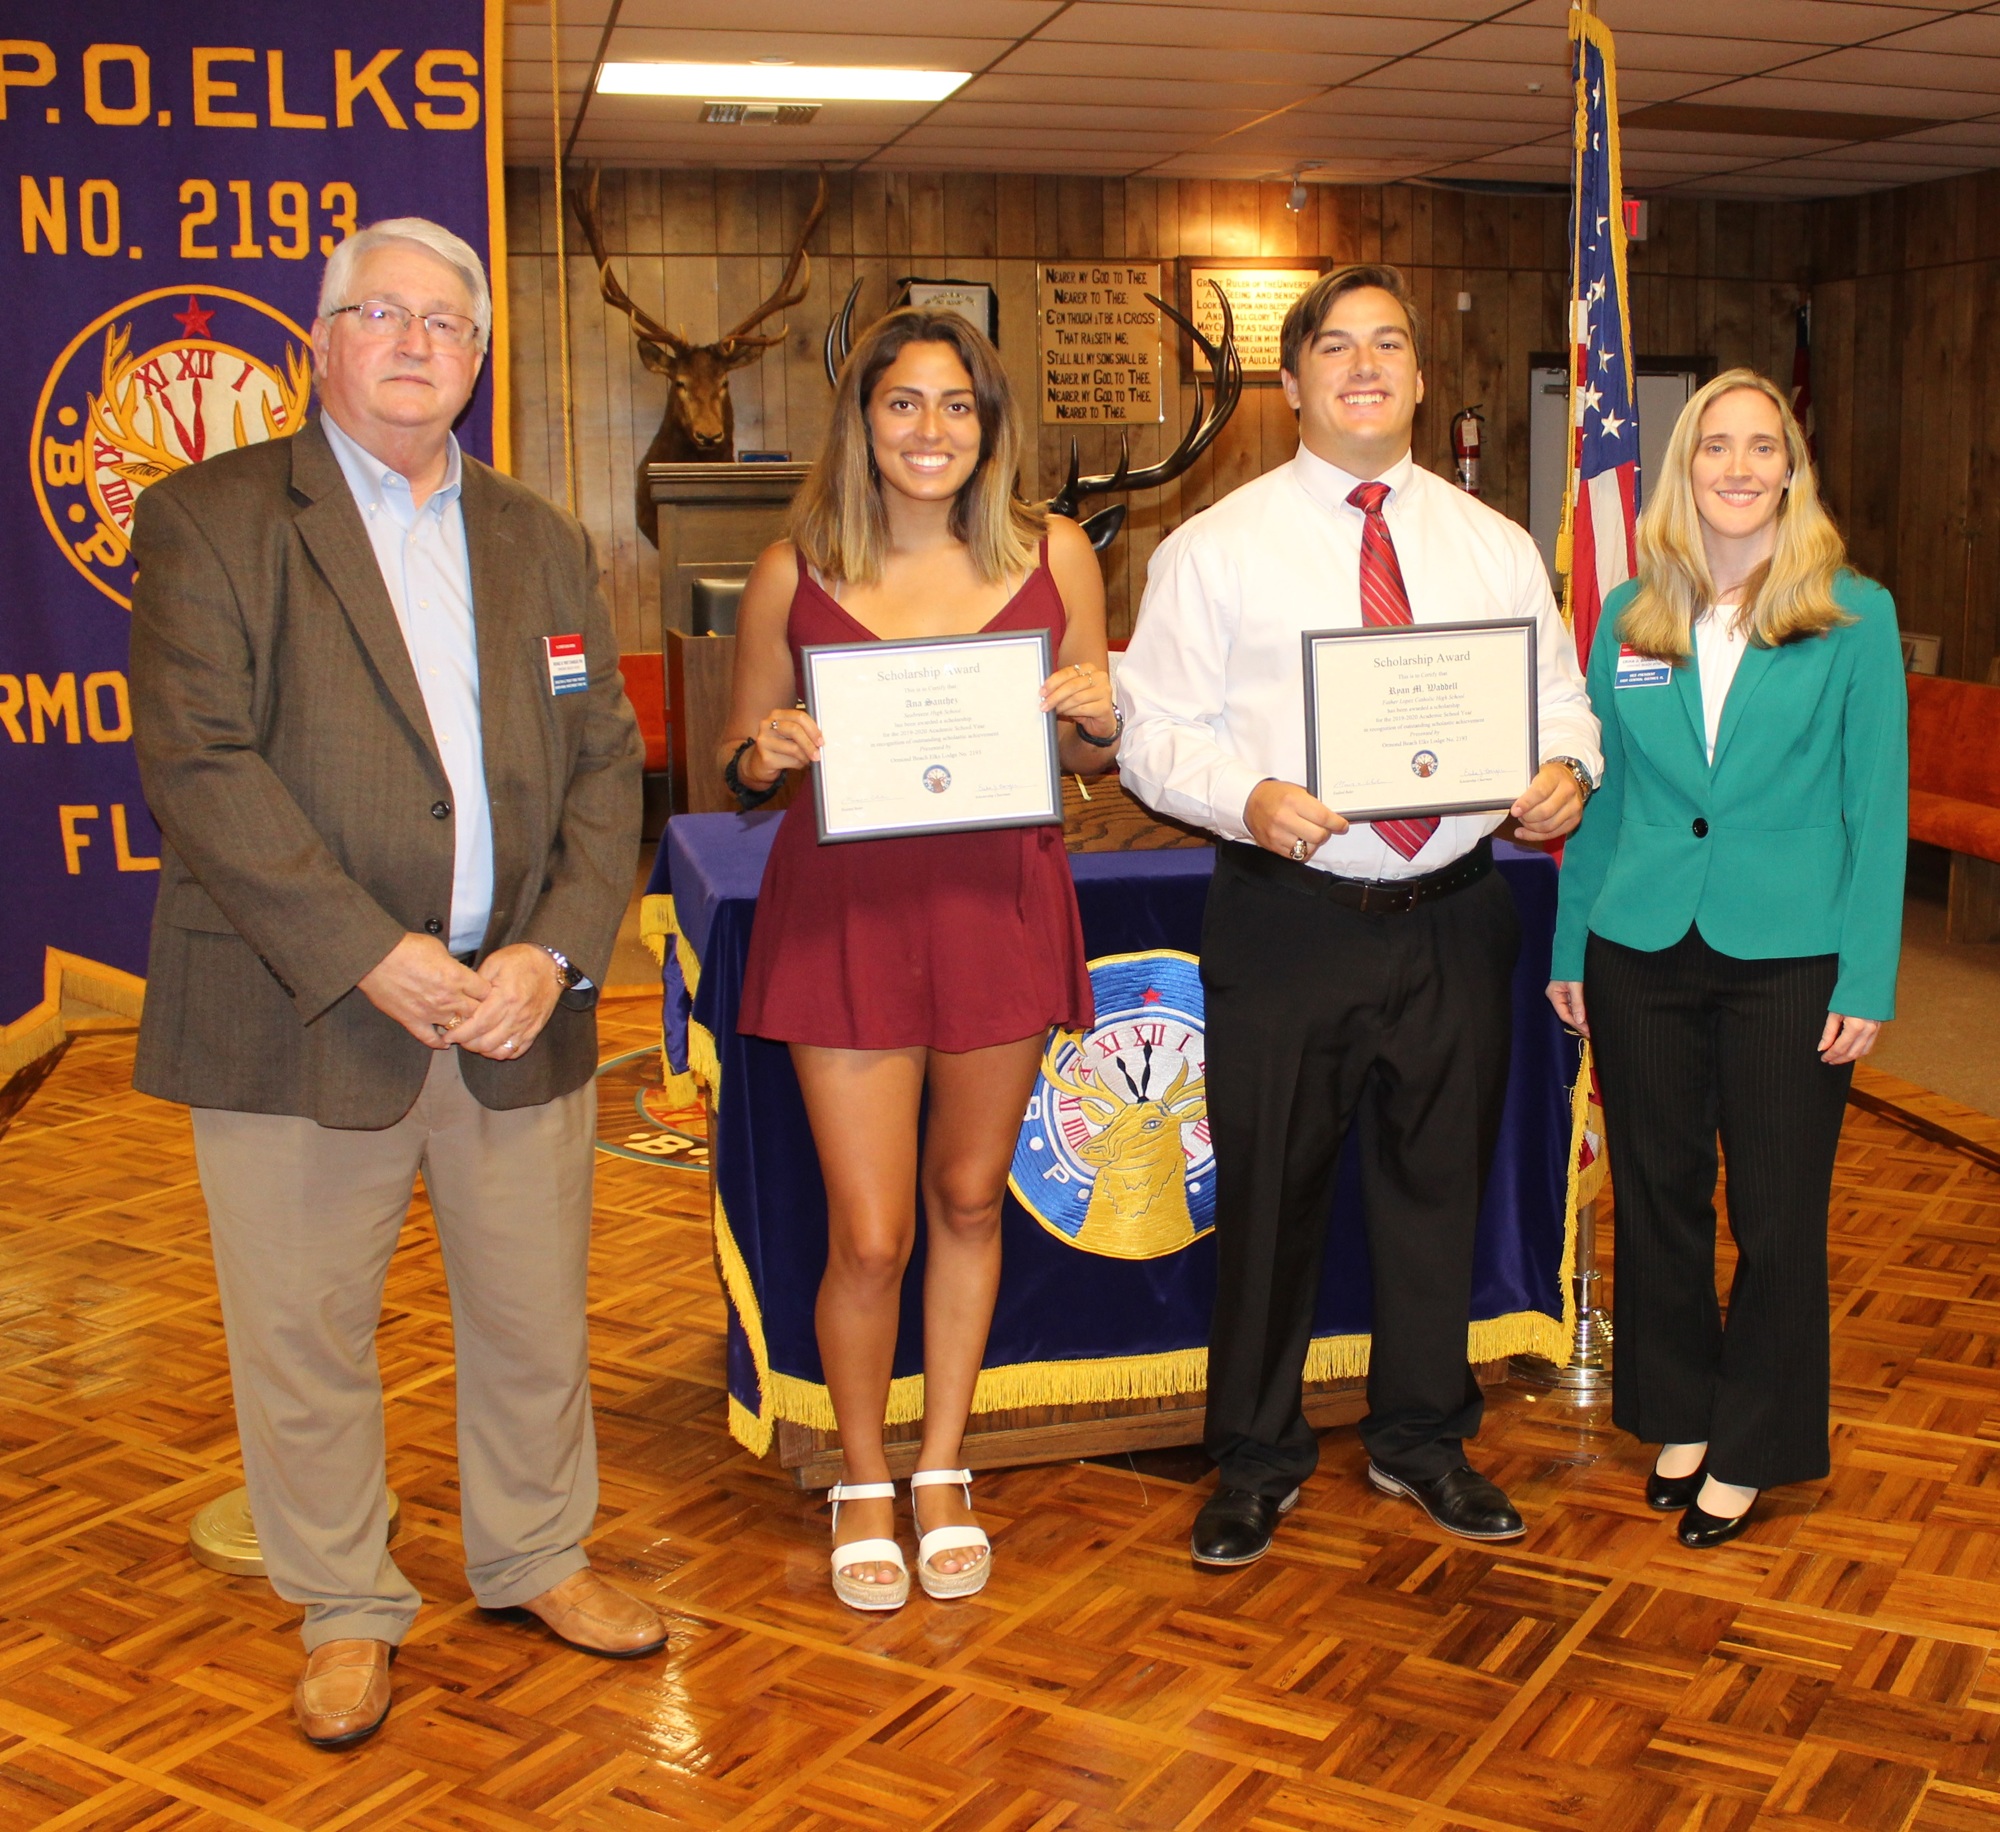 Past District Deputy Michael Chandler, Ana Sanchez, Ryan Waddell and Erika Barger, Elks Lodge scholarship chairman and vice president of the East Central District. Courtesy photo